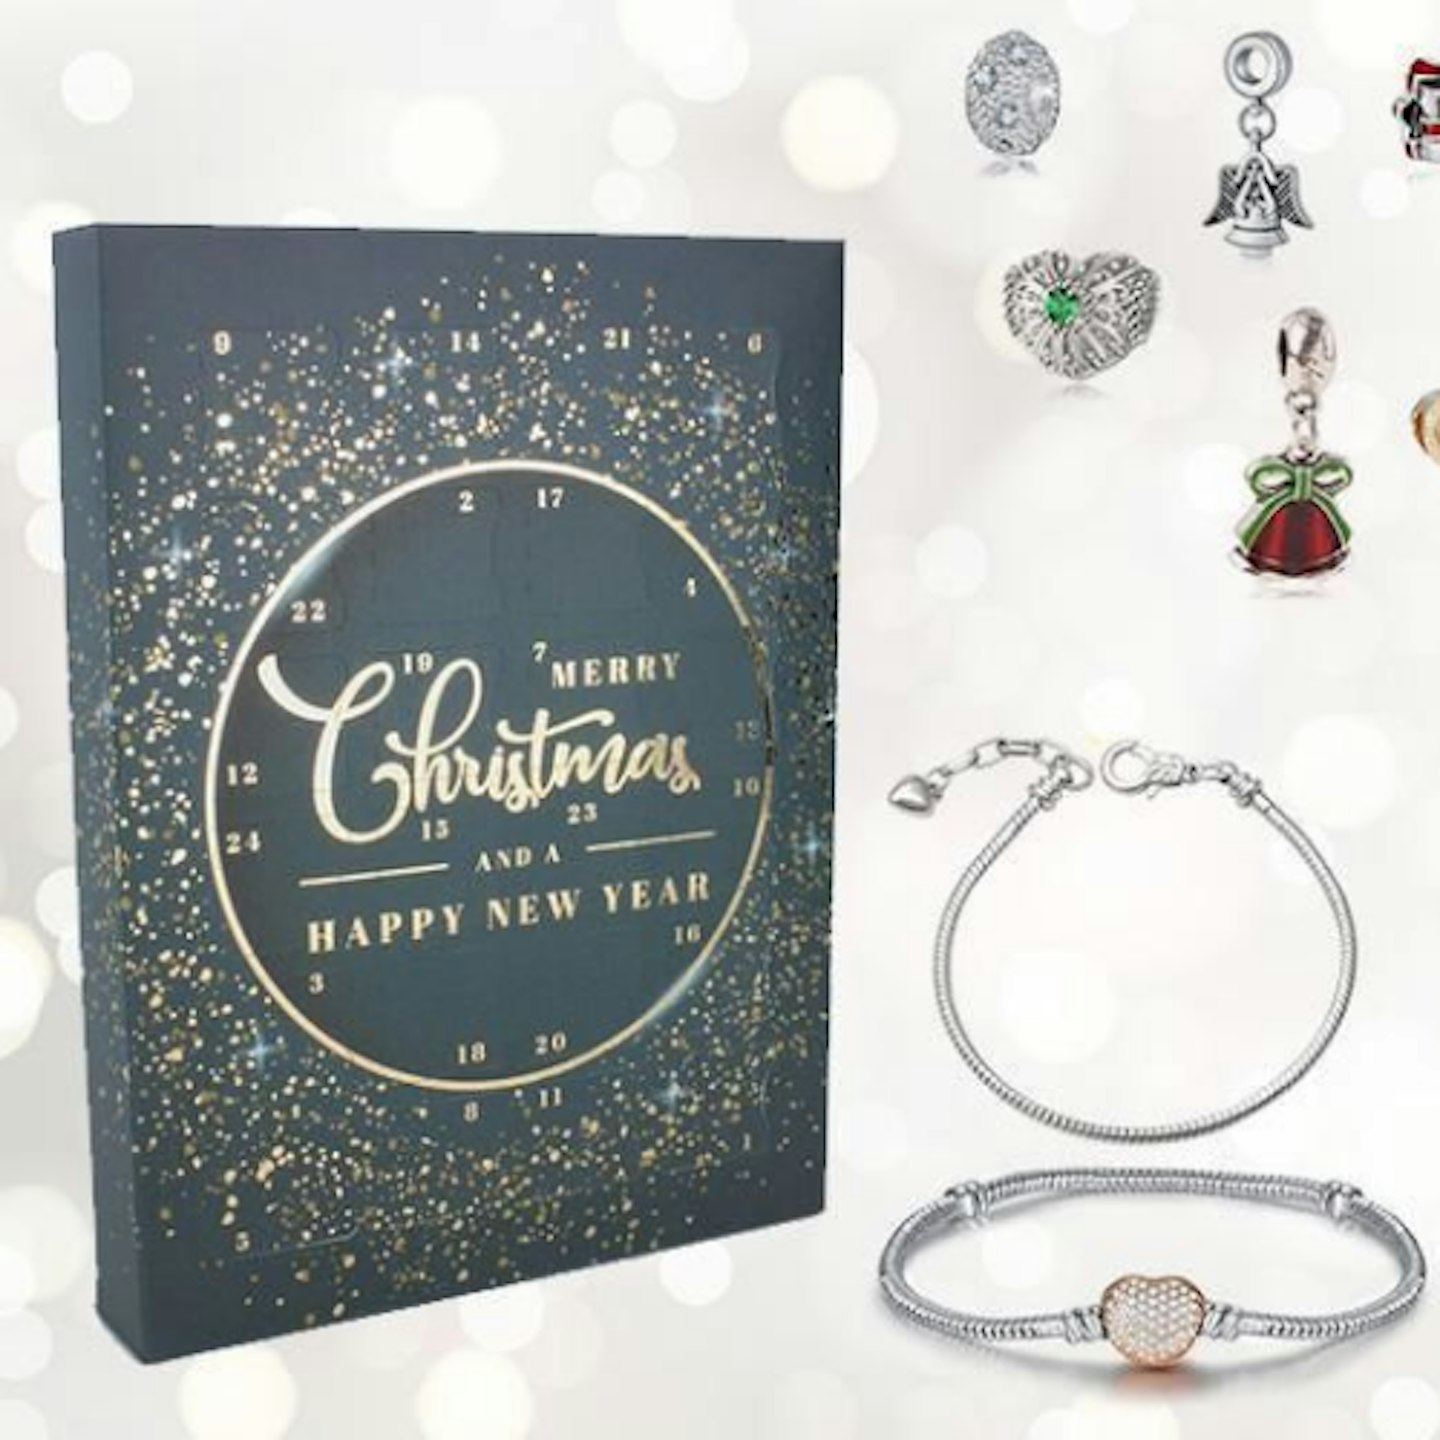 24- Day Jewellery Advent Calendar including Beads, Charms and Bracelets